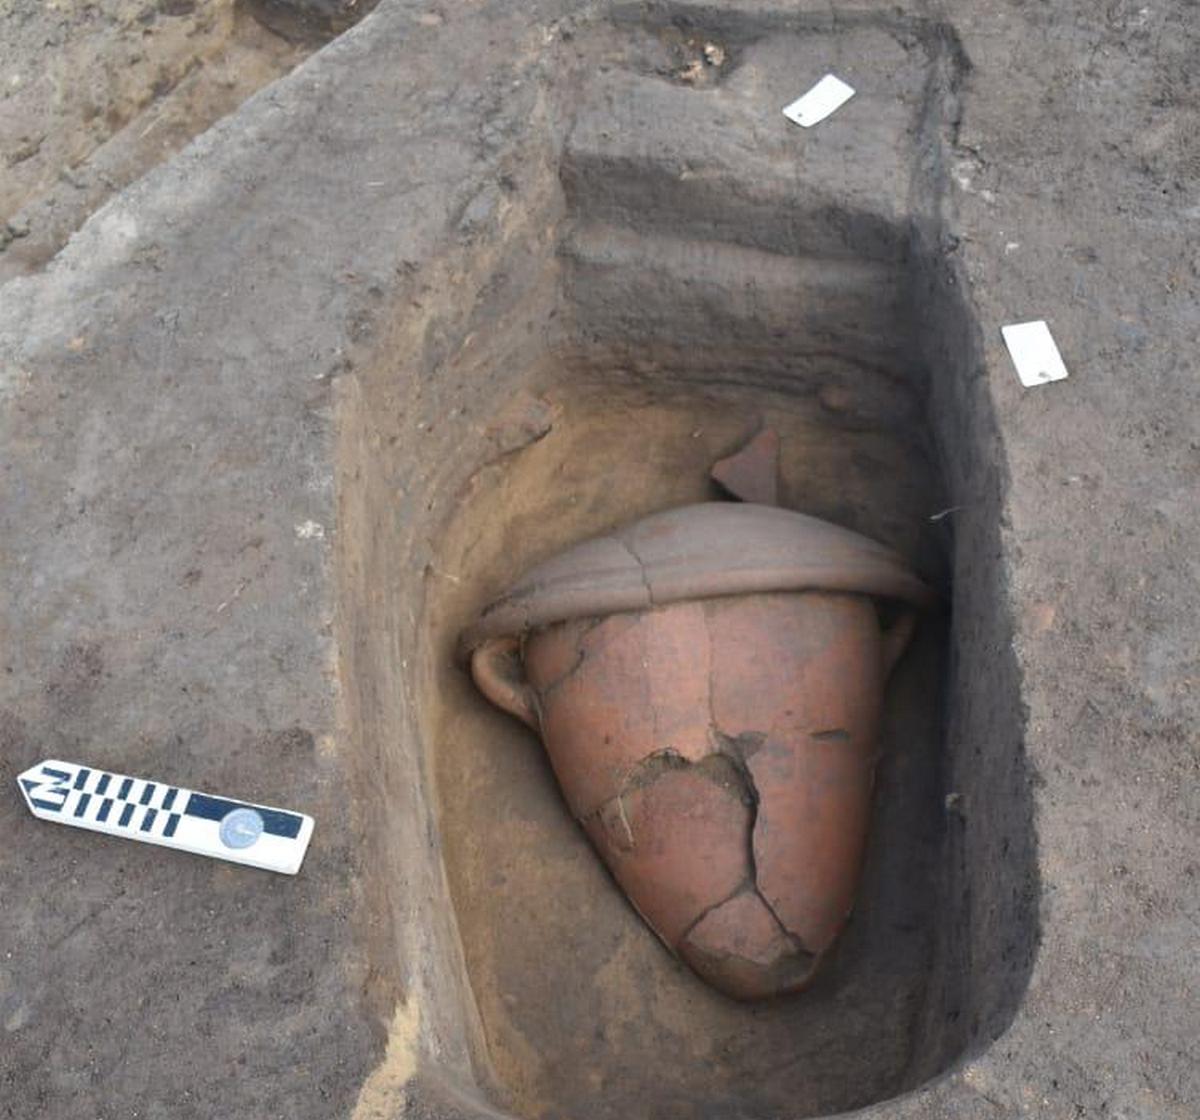 In Egypt, a large-scale archaeological discovery - the discovery of 110 tombs